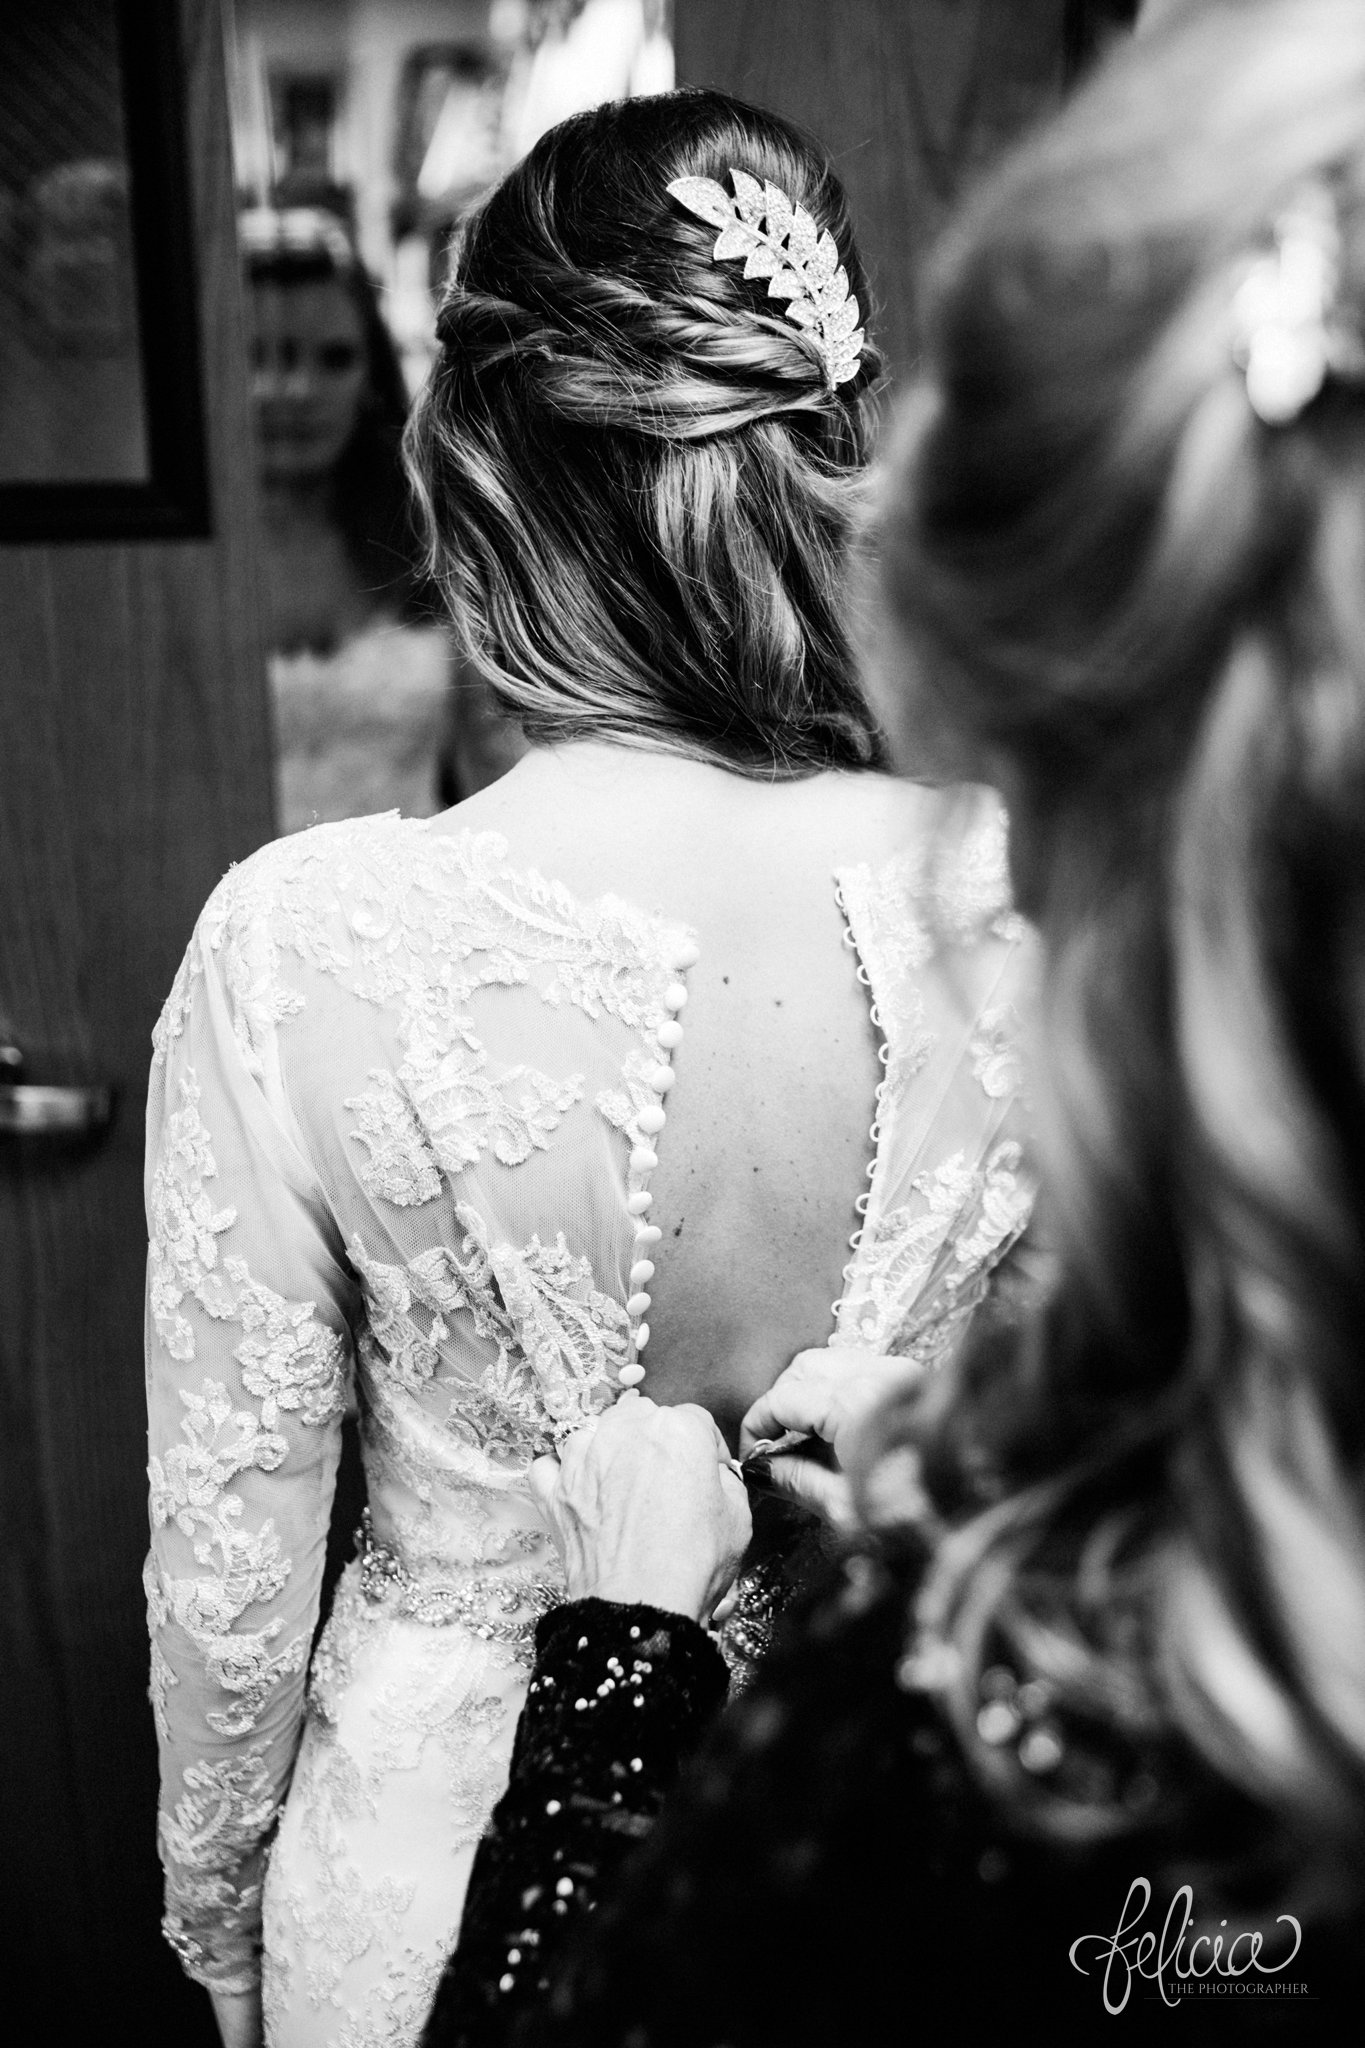 black and white | weddings | wedding photos | wedding photography | images by feliciathephotographer.com | St. Therese Catholic Church | Kansas City | downtown | The Terrace on Grand | wedding prep | getting ready | hair accessories | feather | lace dress | satin buttons | bride and mother | mother of the bride | stepping into dress | wedding dress | White Carpet Bride | Maggie Sottero 